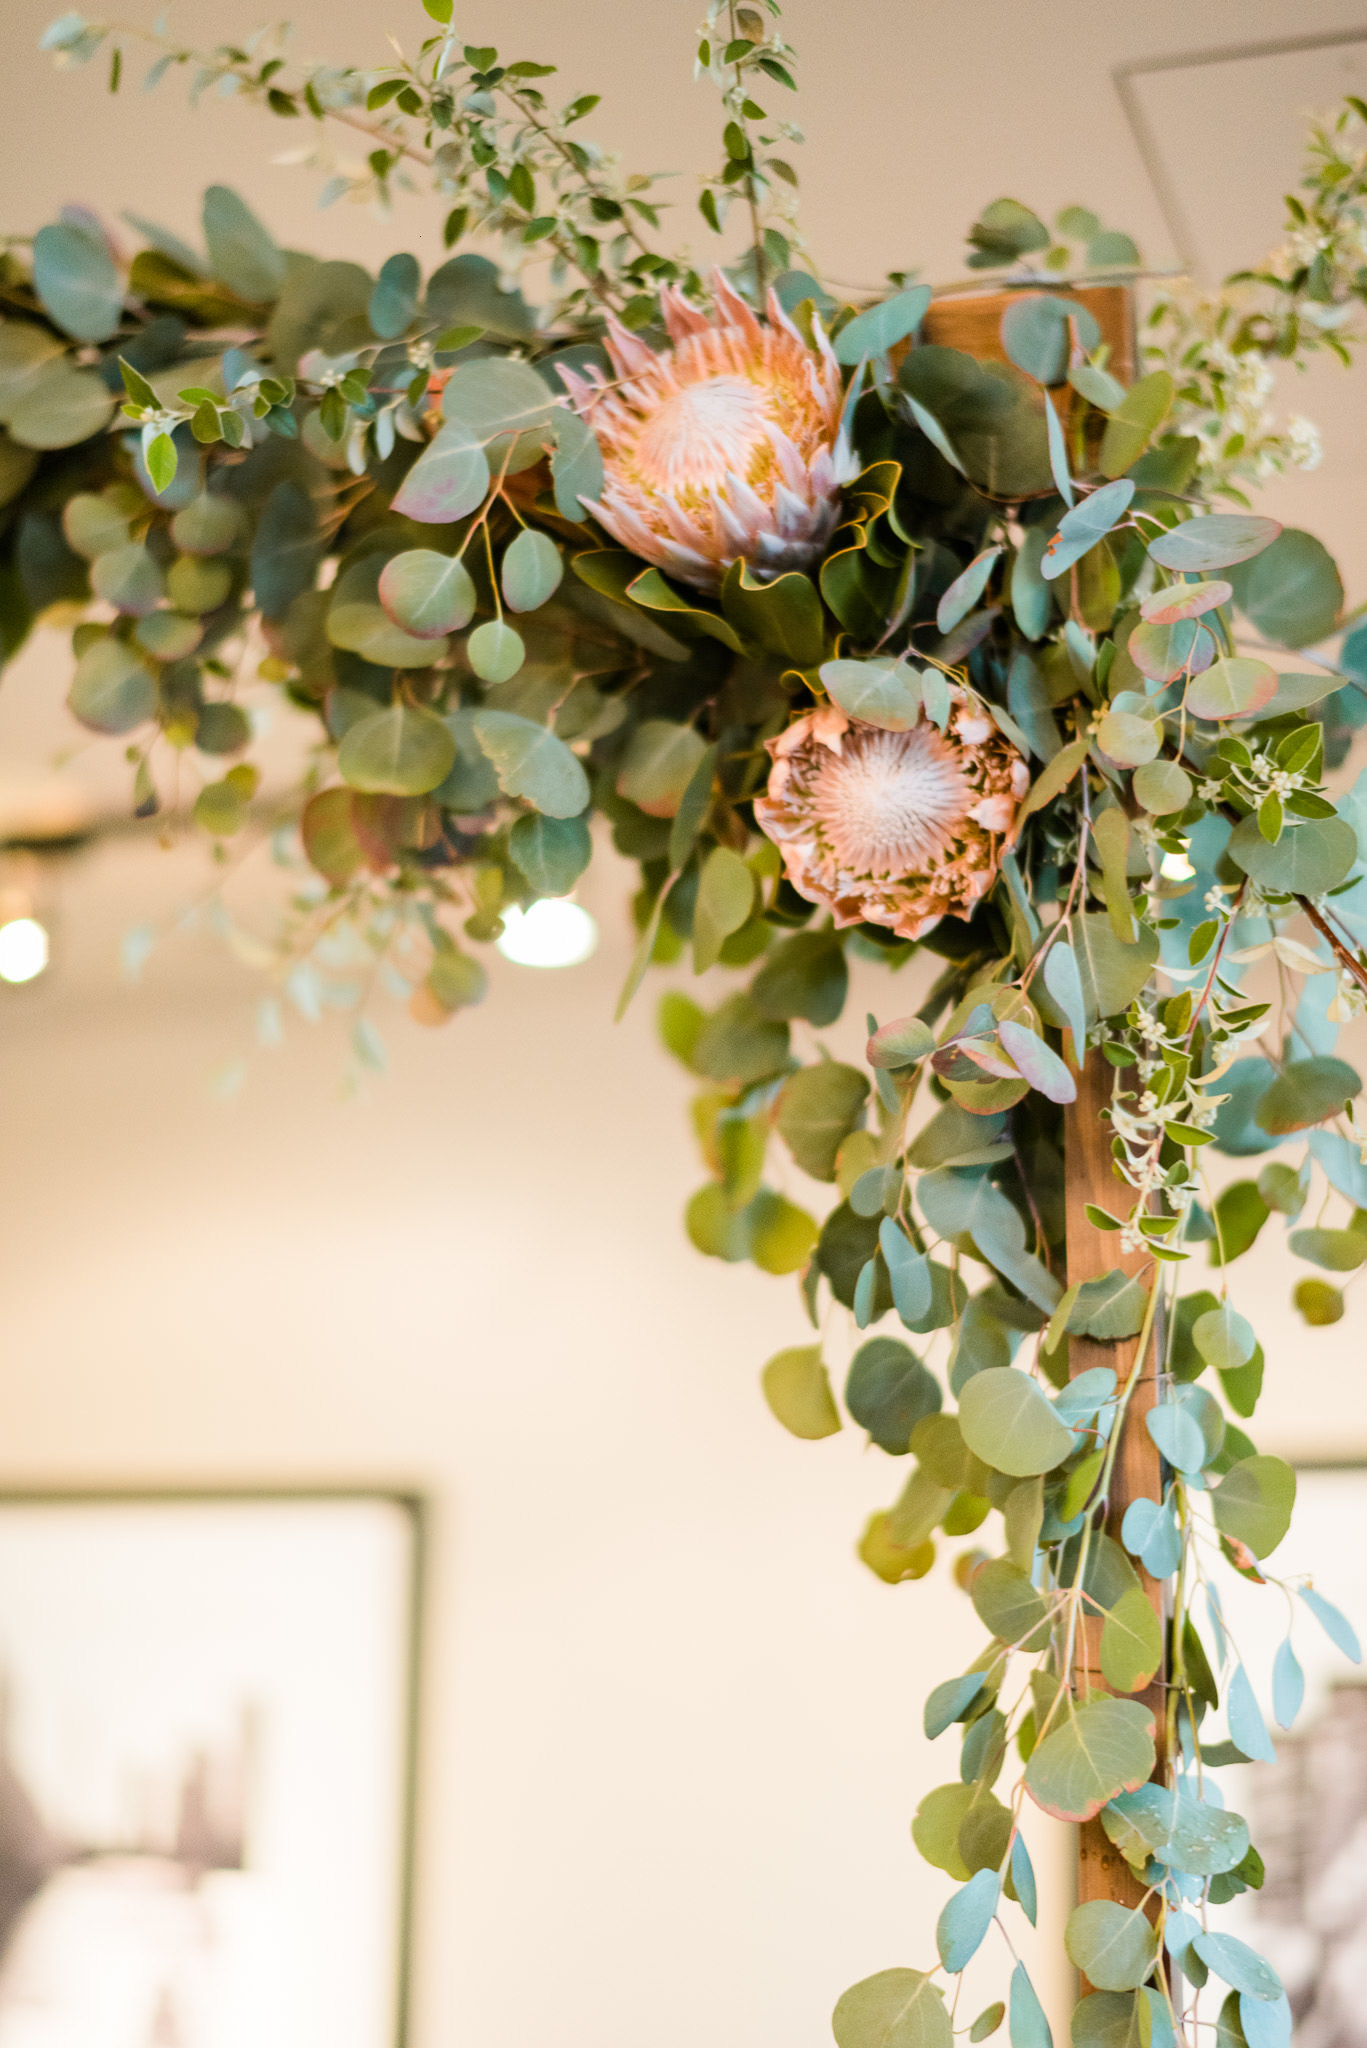 Eucalyptus, protea, and flowering branches on ceremonial arch for spring wedding at River Roast Chicago.